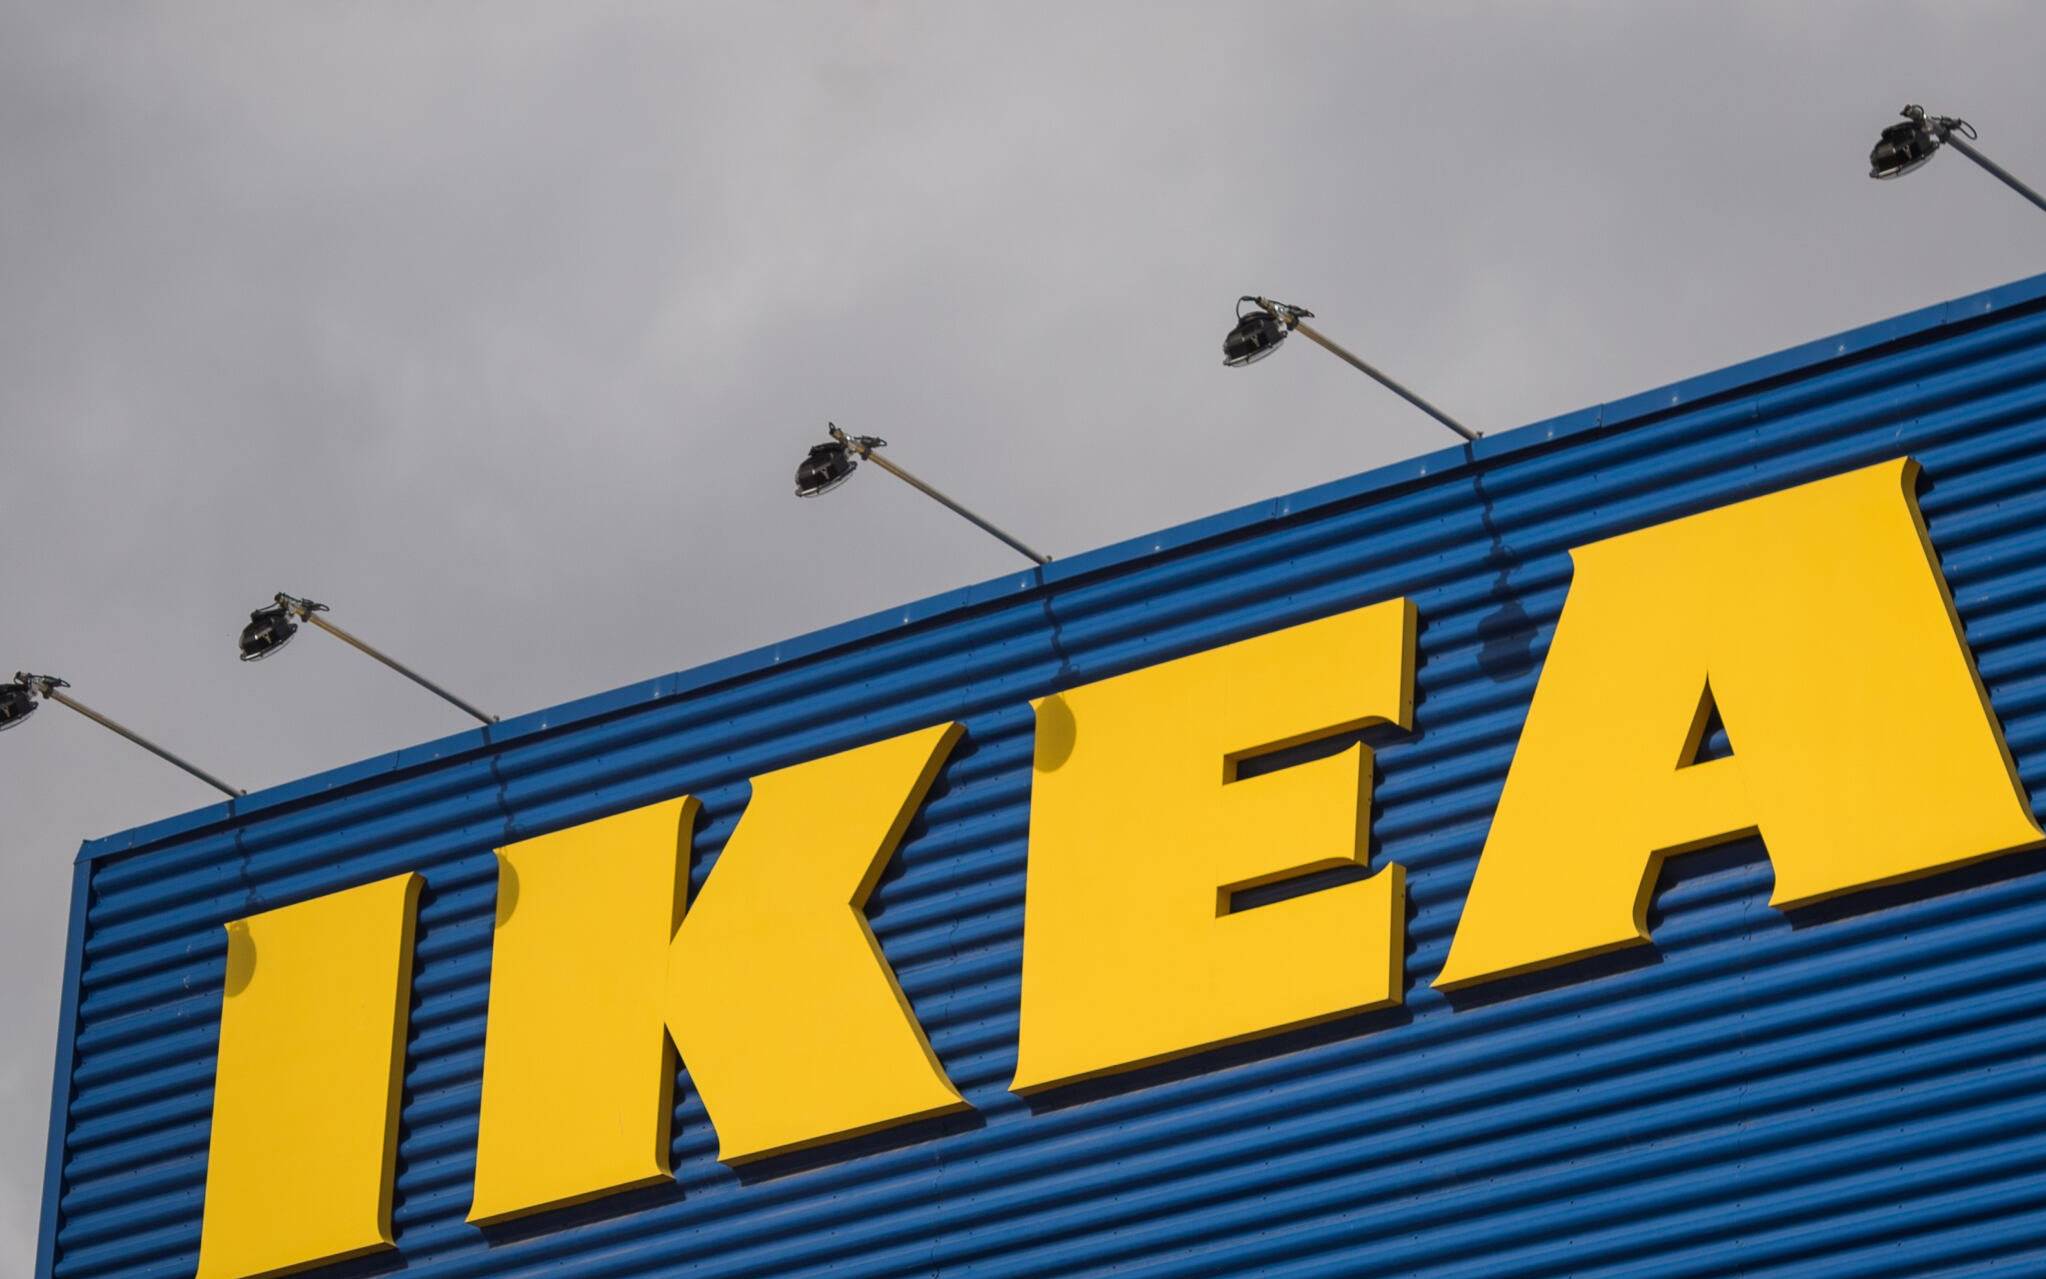 (FILES) In this file photo taken on March 30, 2016 the logo of IKEA is pictured outside Europe's biggest Ikea store in Kungens Kurva, south-west of Stockholm on March 30, 2016. - Swedish furniture giant Ikea said on March 3, 2022 it would suspend its activities in Russia and Belarus, affecting nearly 15,000 employees, 17 stores and three production sites, in response to the war in Ukraine. (Photo by JONATHAN NACKSTRAND / AFP)